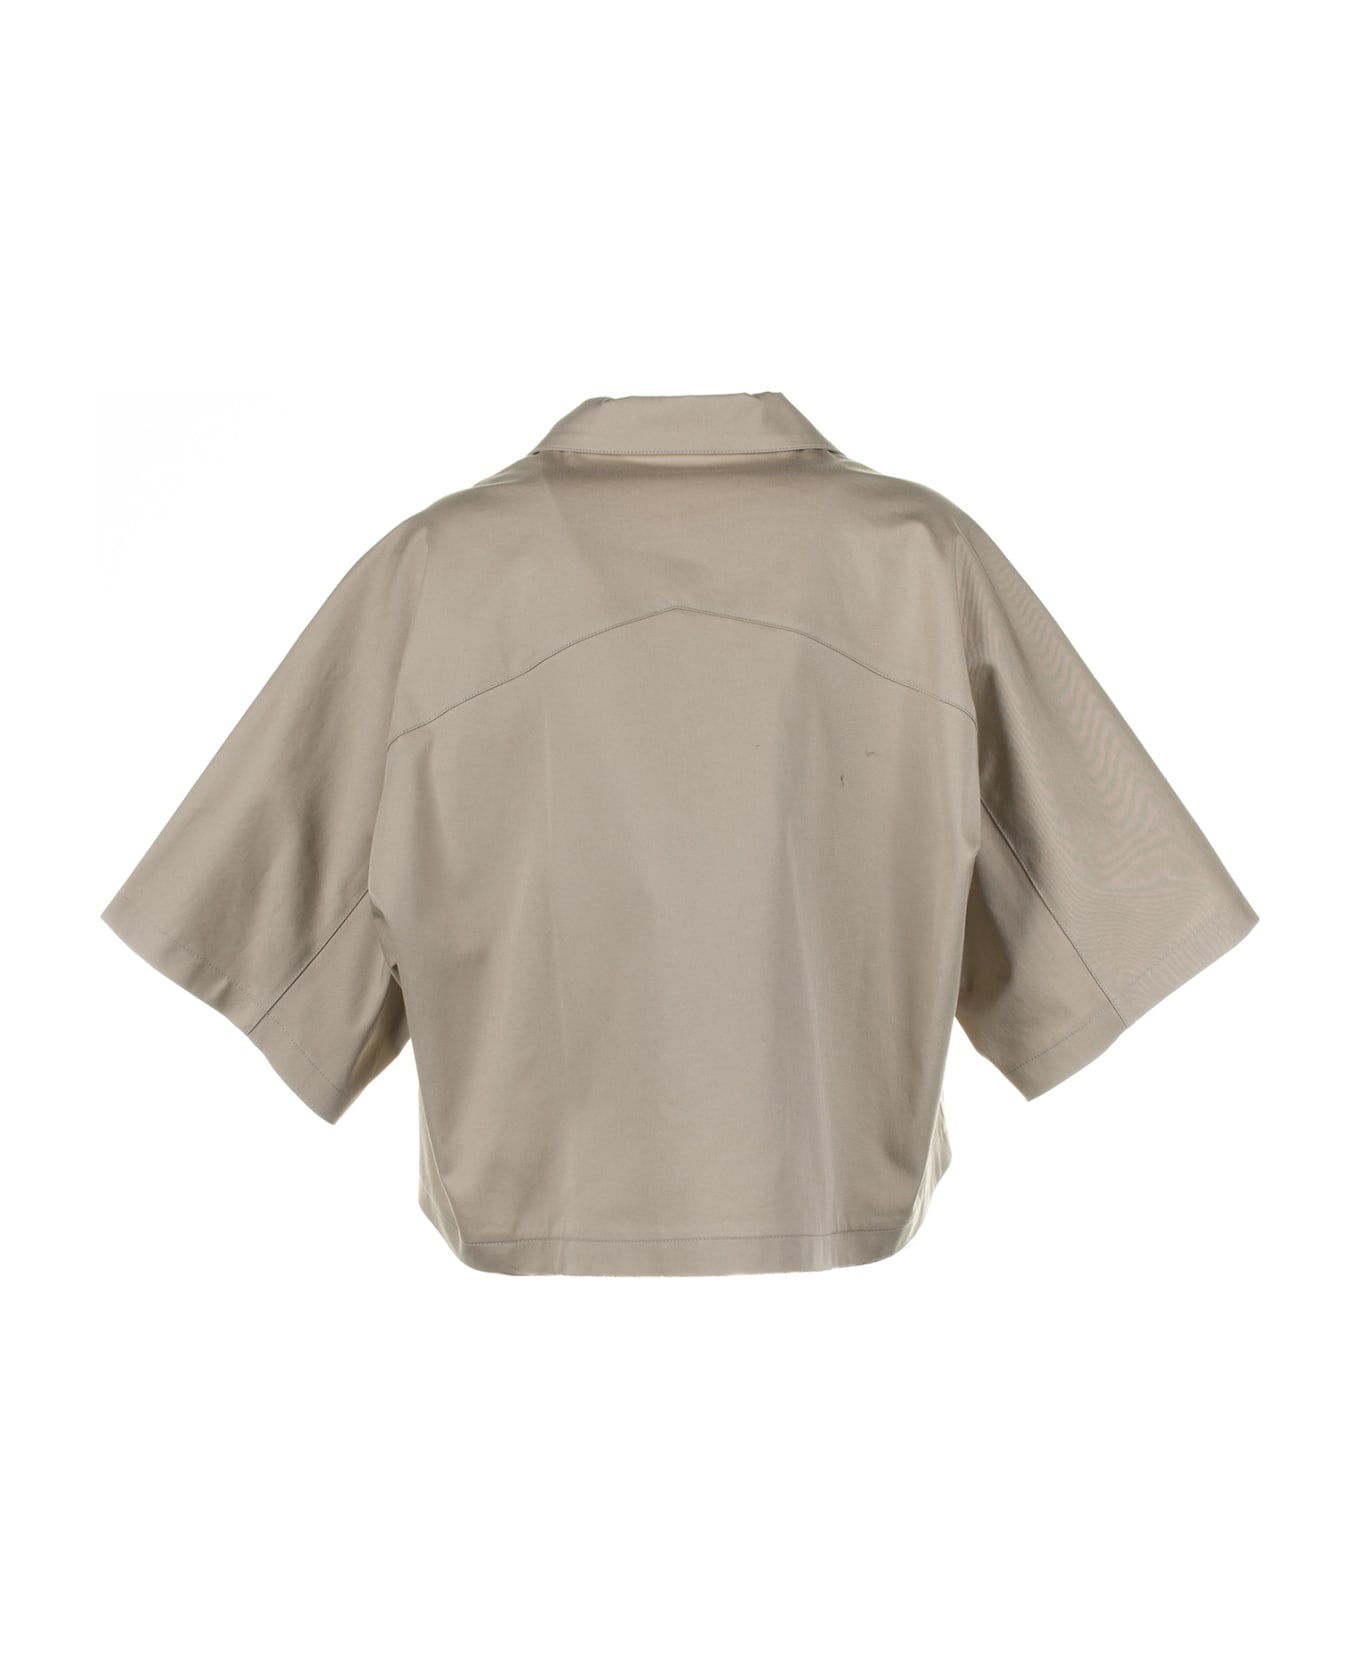 Seventy Beige Cape With Buttons - BEIGE シャツ